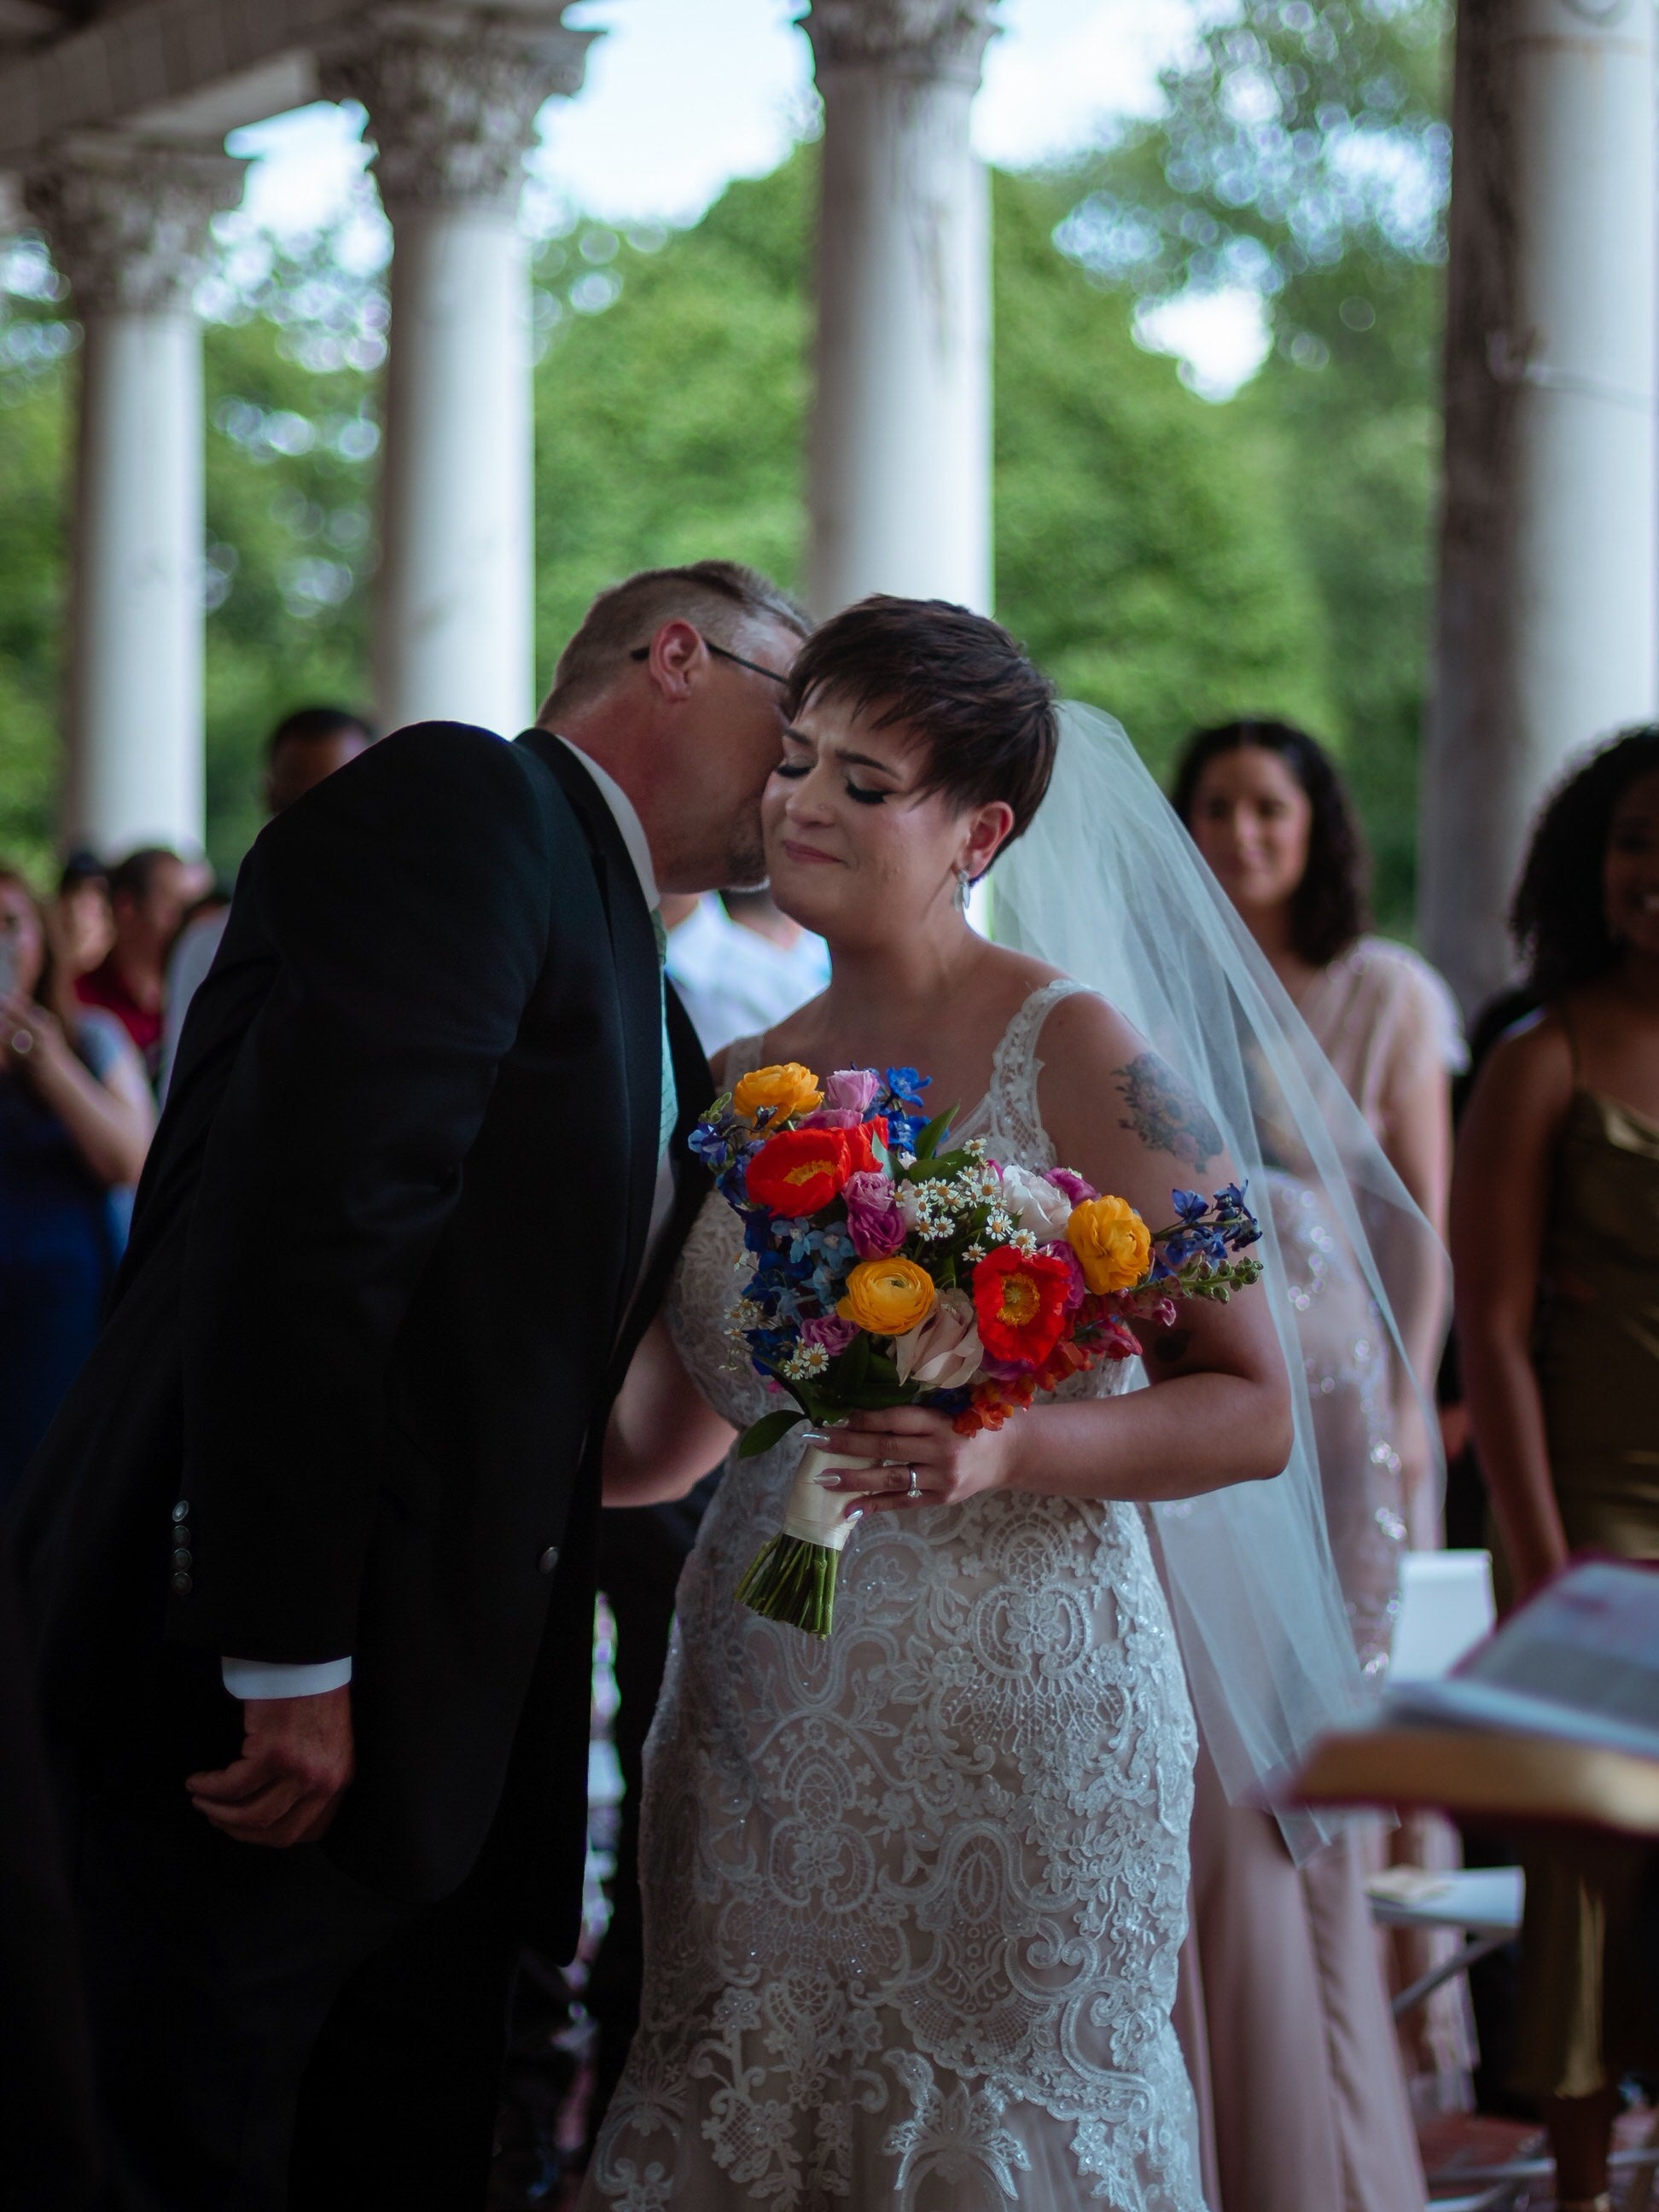 mid length ivory bridal veil in bride's short hair as she hold colorful wildflower bouquet